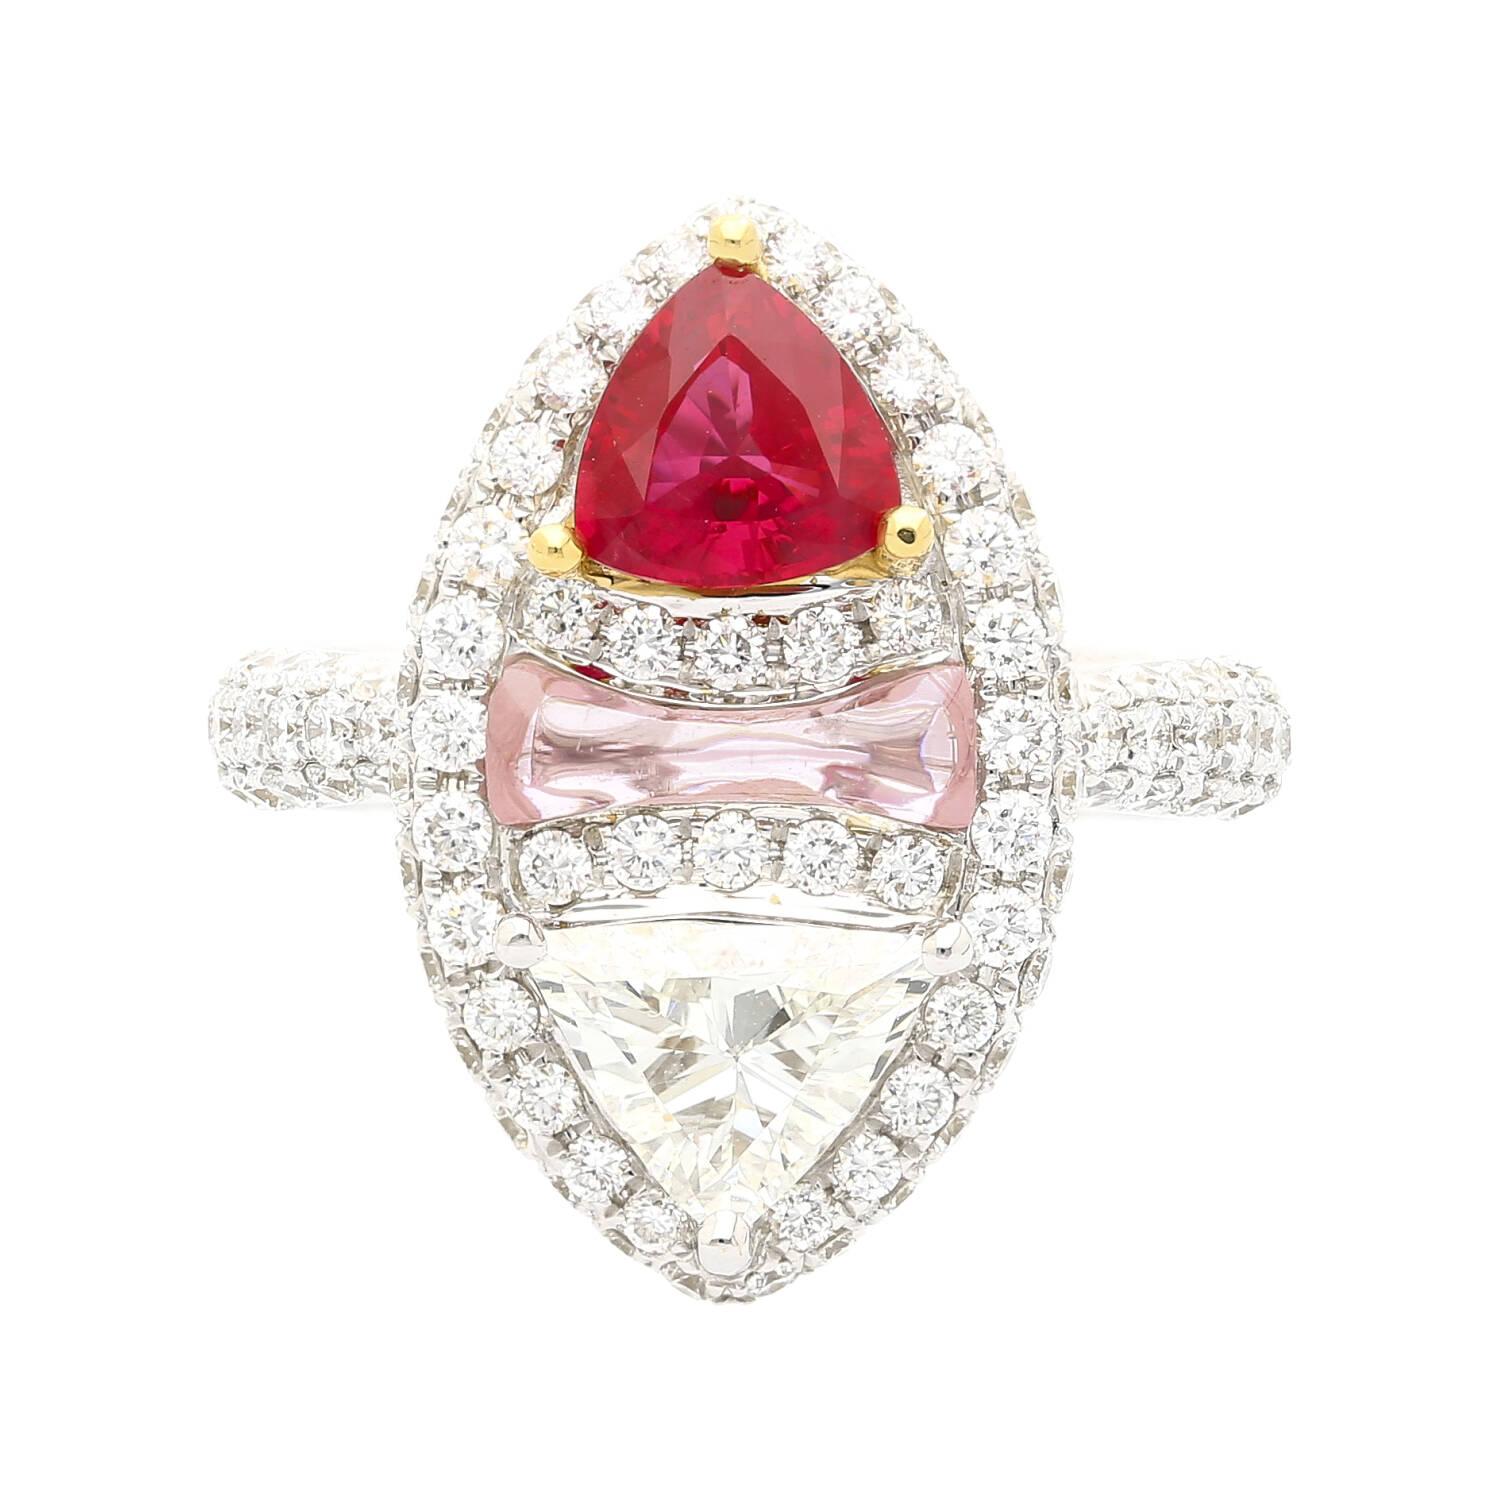 18k white gold ring with an elongated oval shape. Features two trilliant-cut gemstones: a 0.83-carat triangular-cut Burma ruby and a 0.42-carat triangular-cut diamond. Symmetrically placed. A round-cut diamond halo of 1.16 carats surrounds the